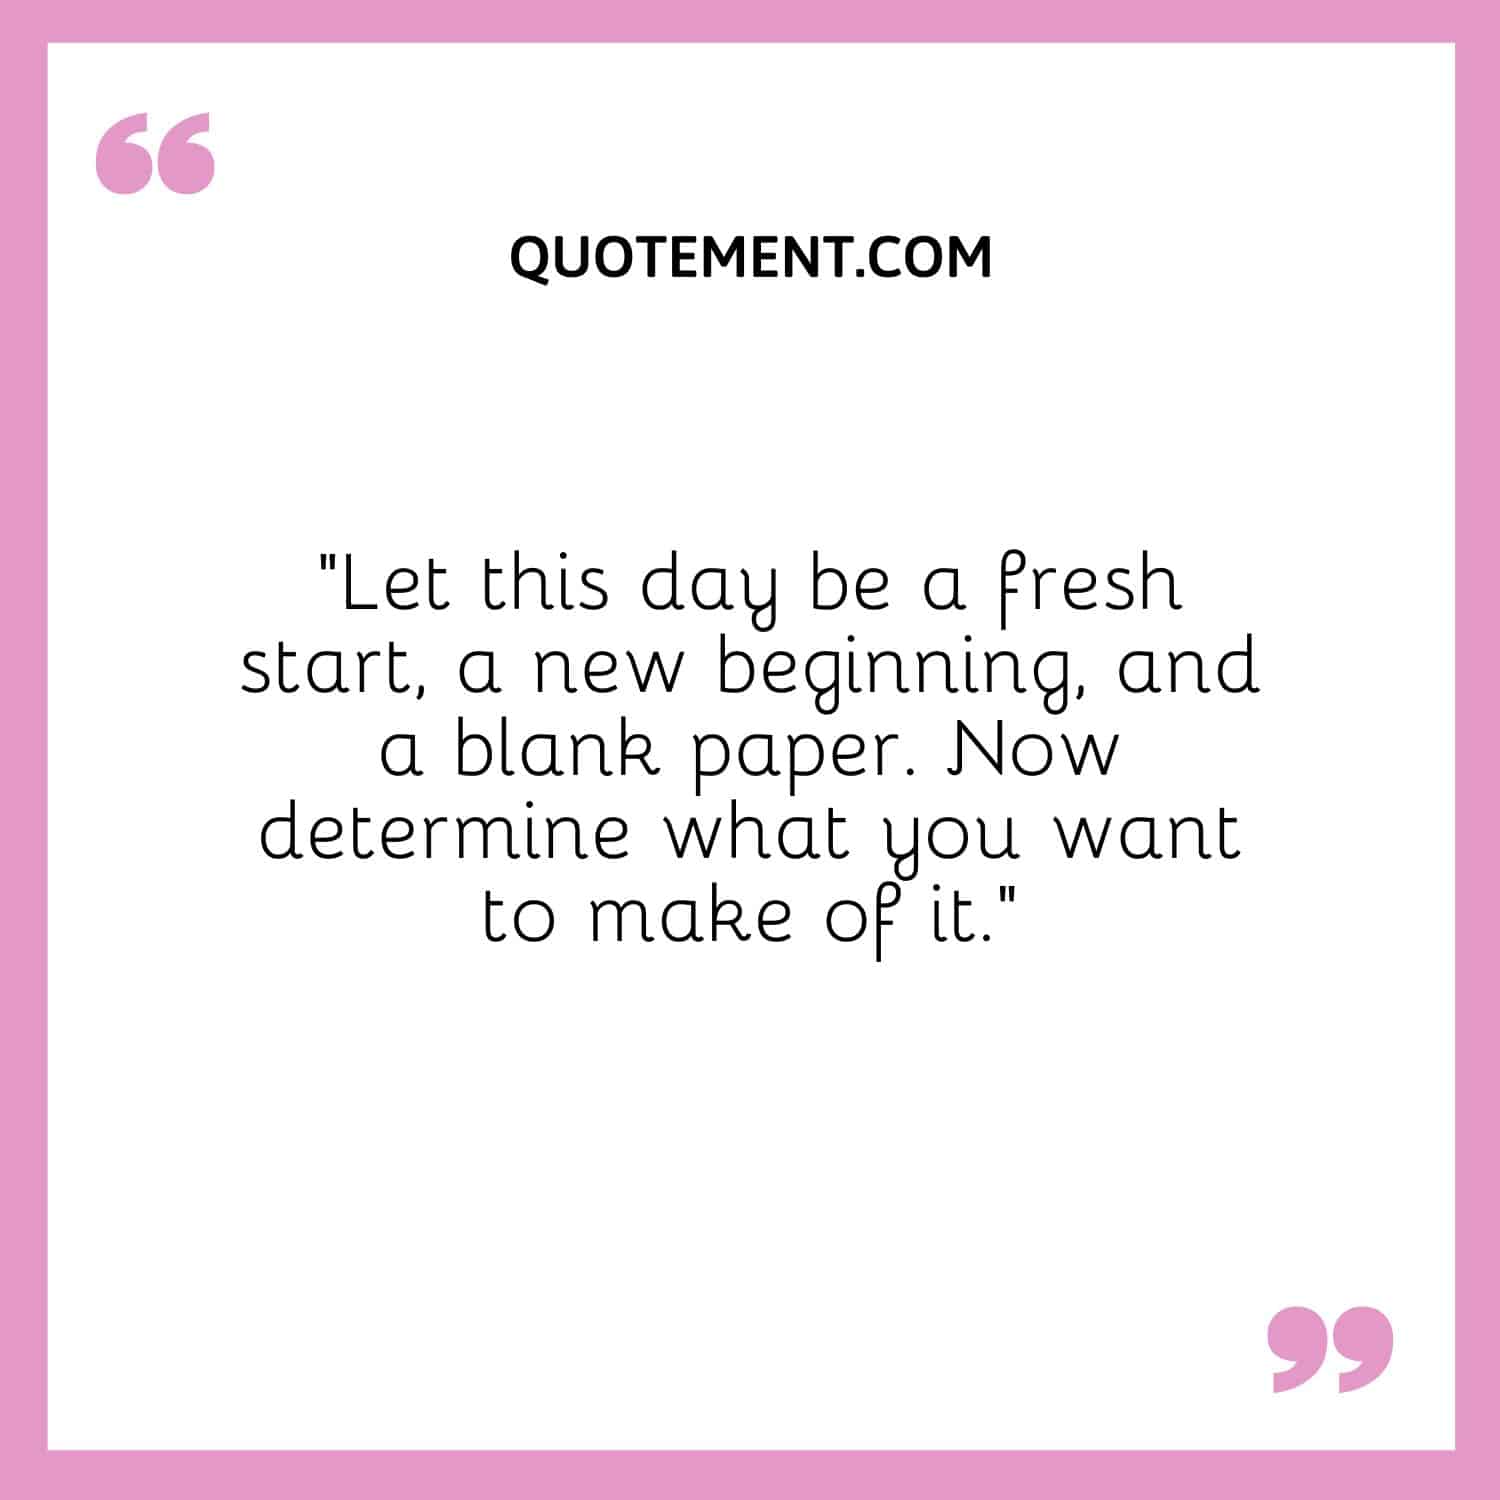 Let this day be a fresh start